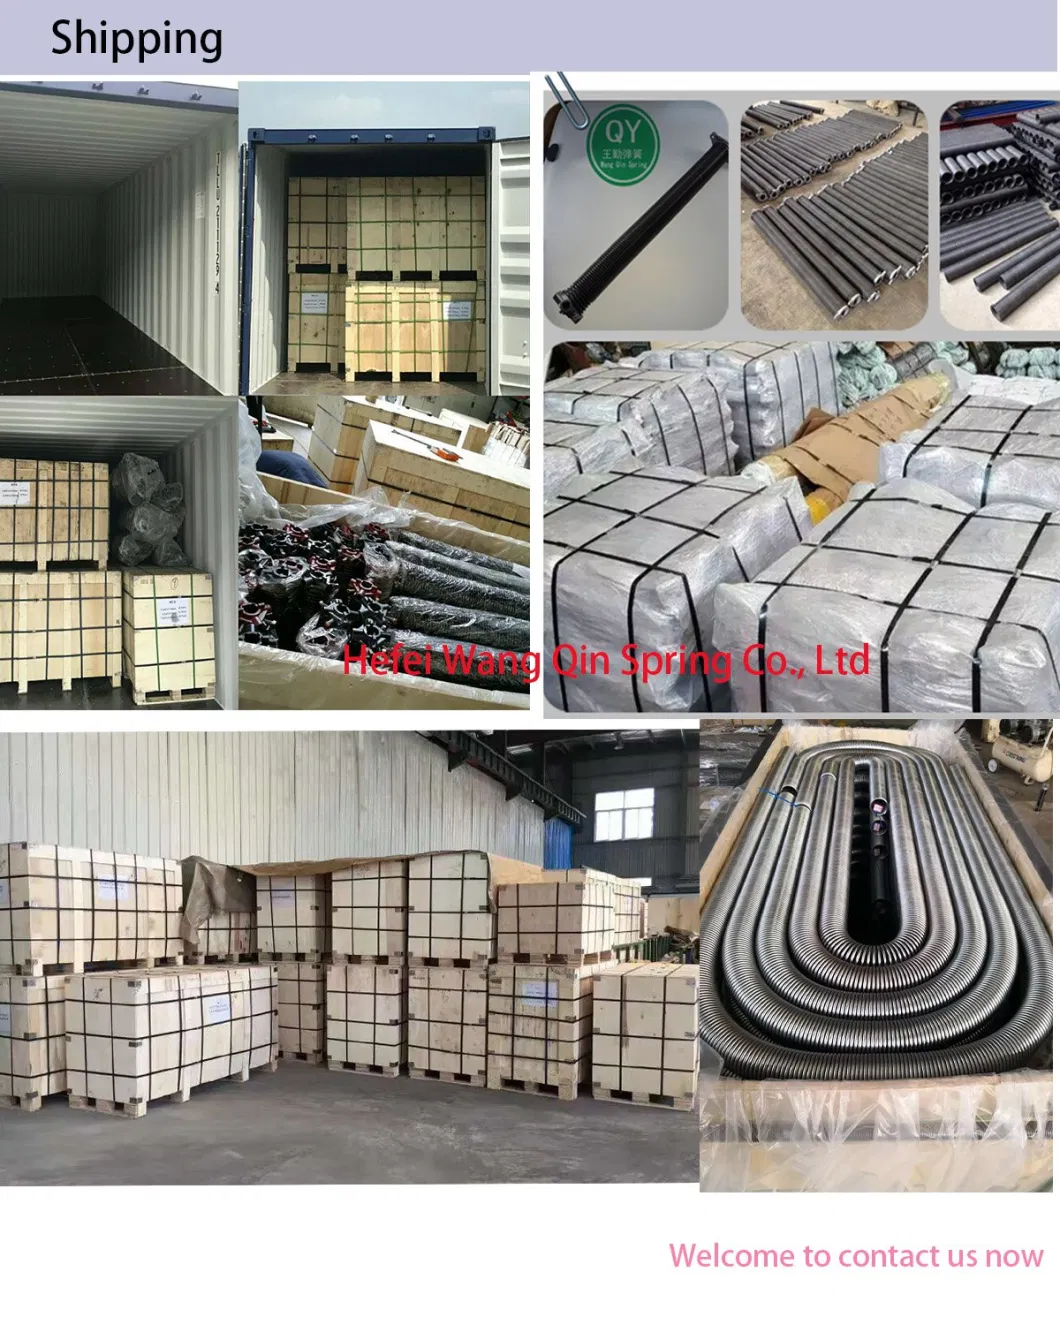 High Tension Strength Roller Garage Extension Springs Used for Industrial Doors